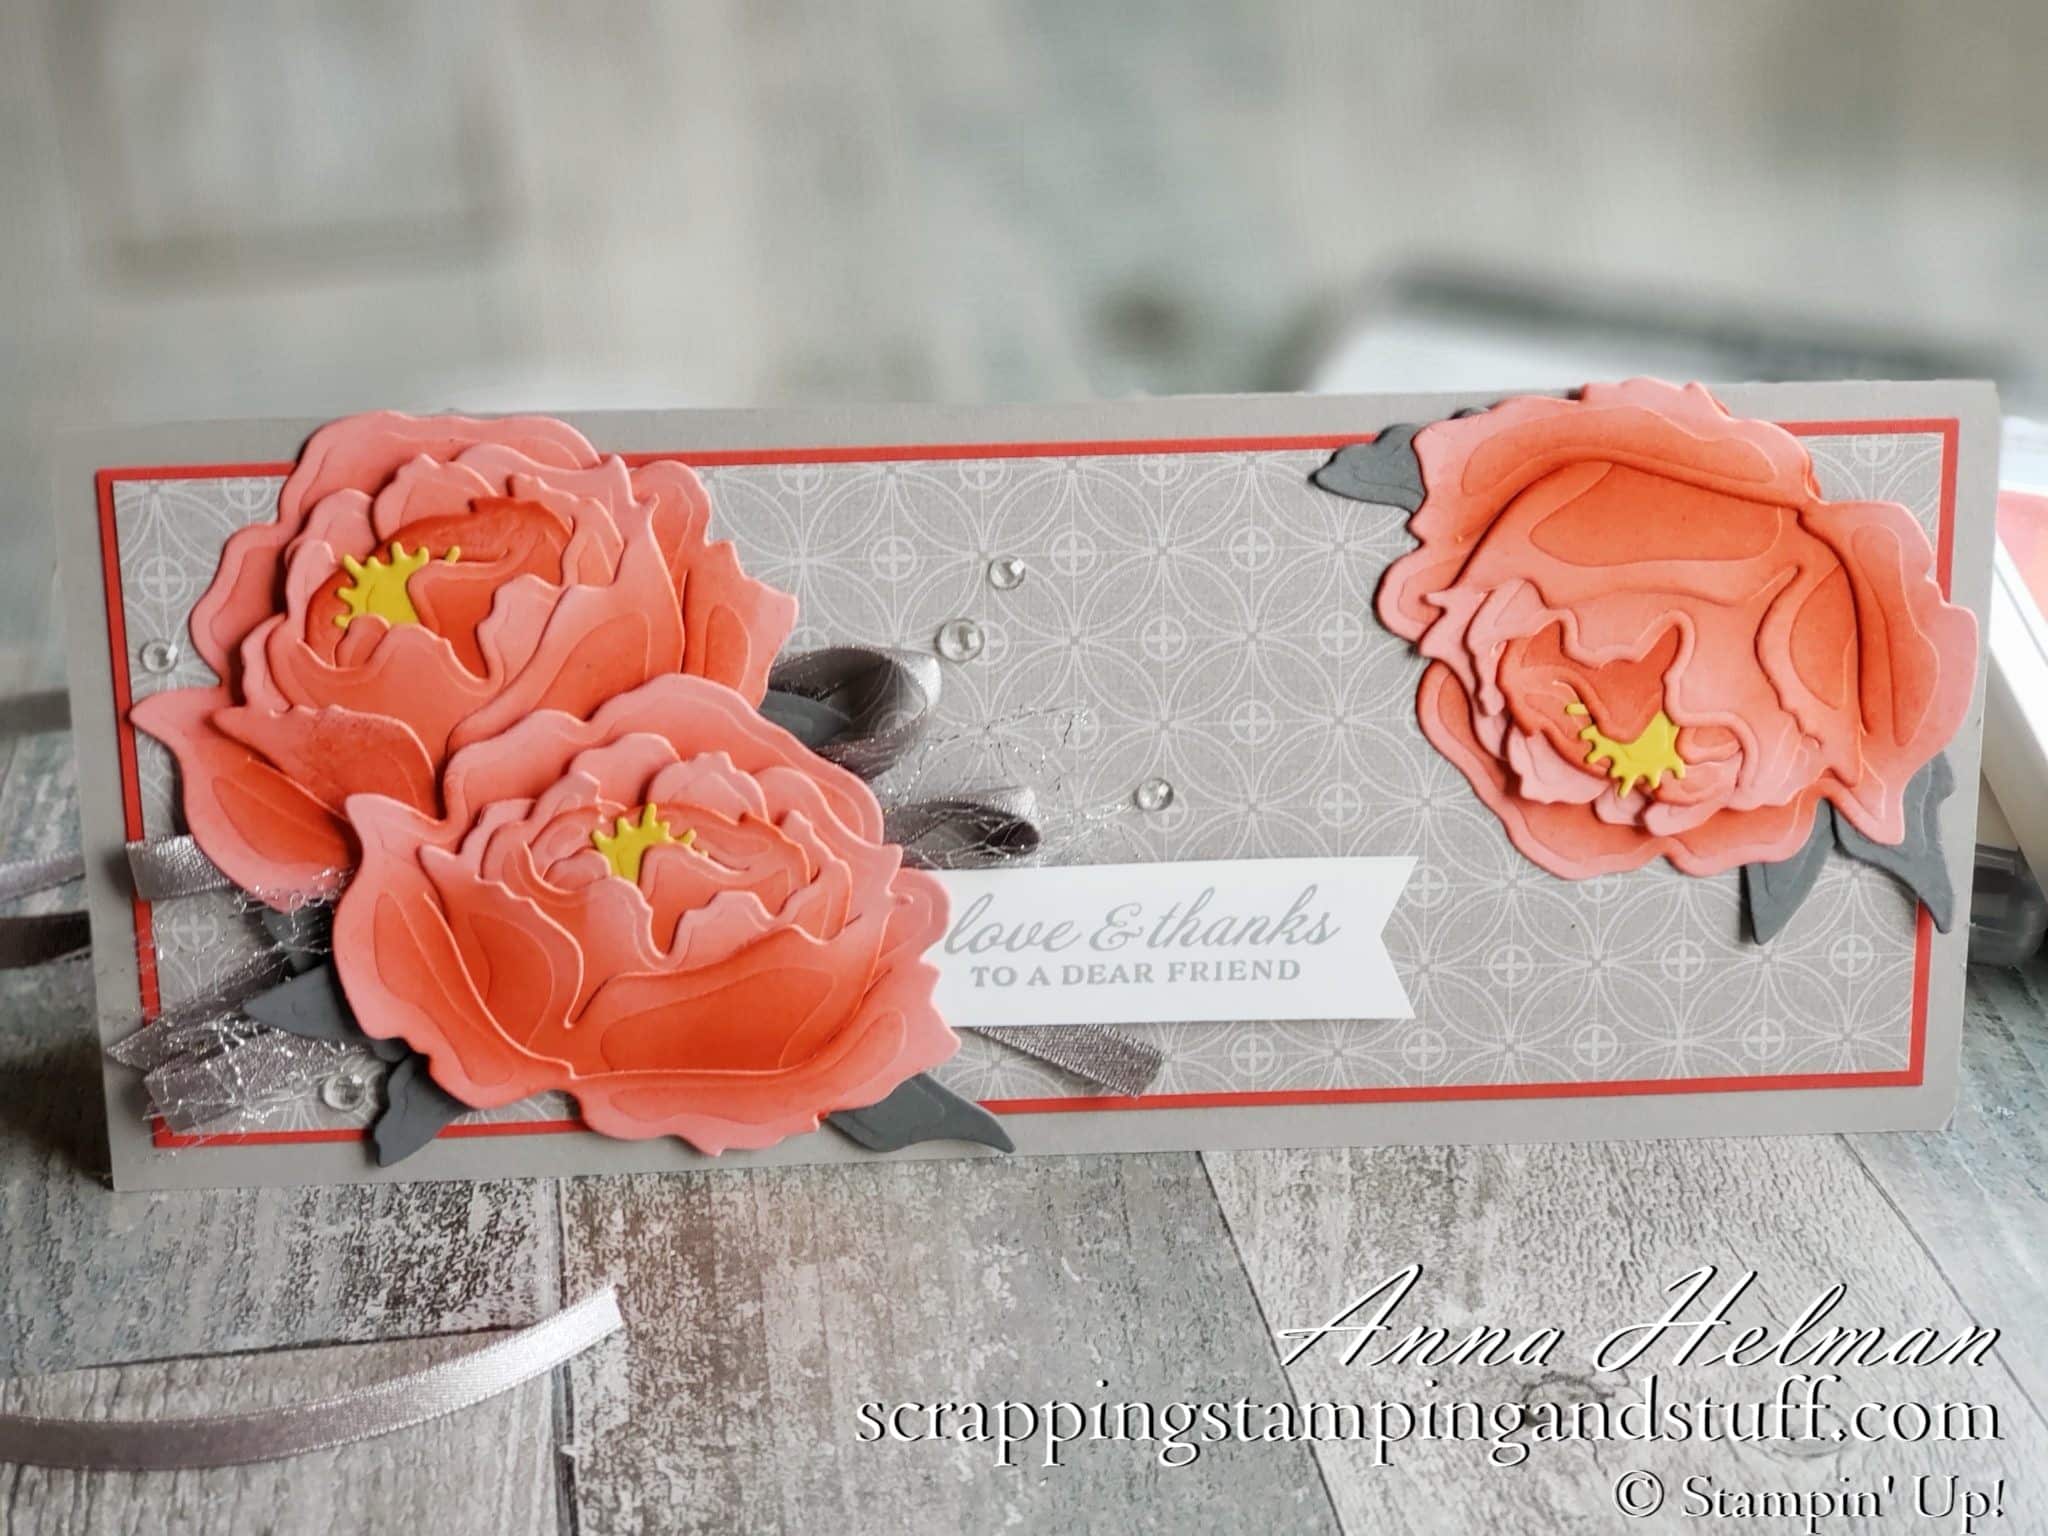 See how to sponge the Stampin Up peony as well as a beautiful slimline card made with the Stampin Up Prized Peony bundle in the 2020 Annual Catalog.